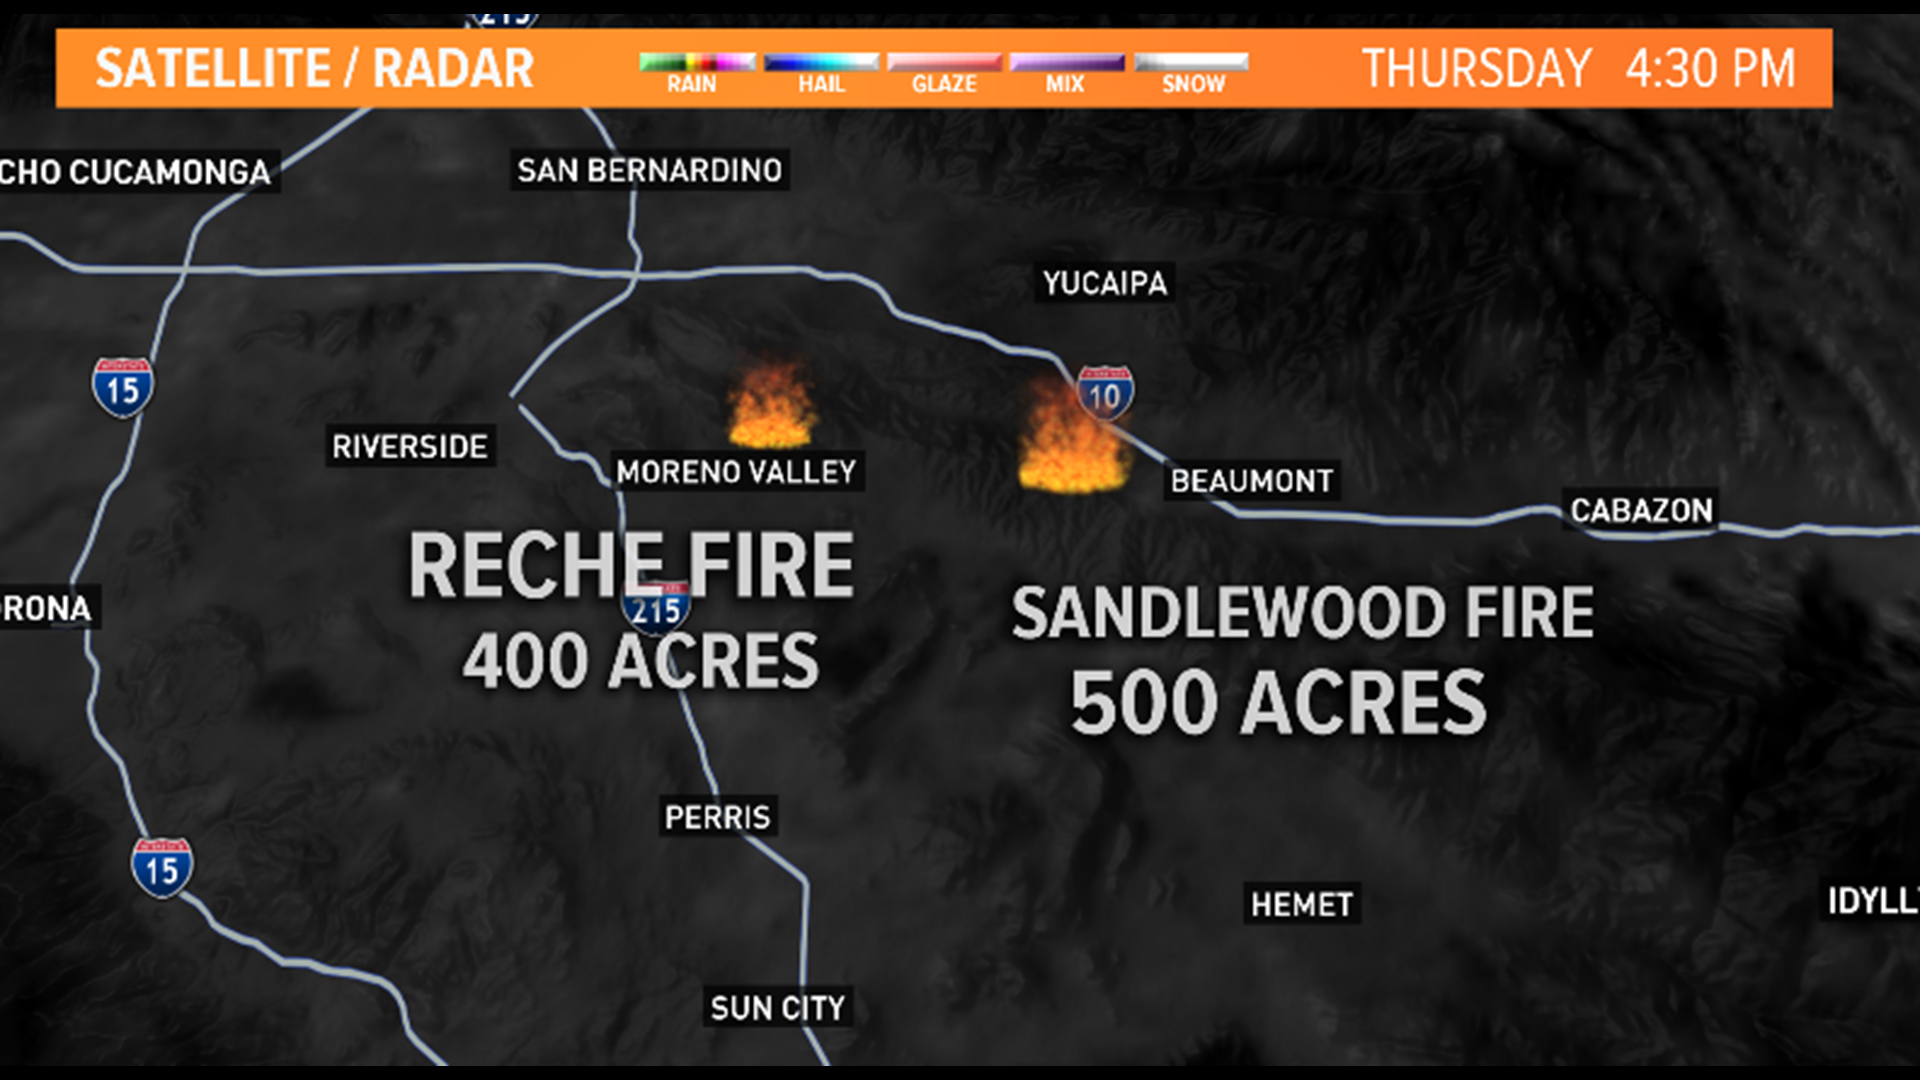 What we know about the Reche, Sandlewood, & Eagle fires